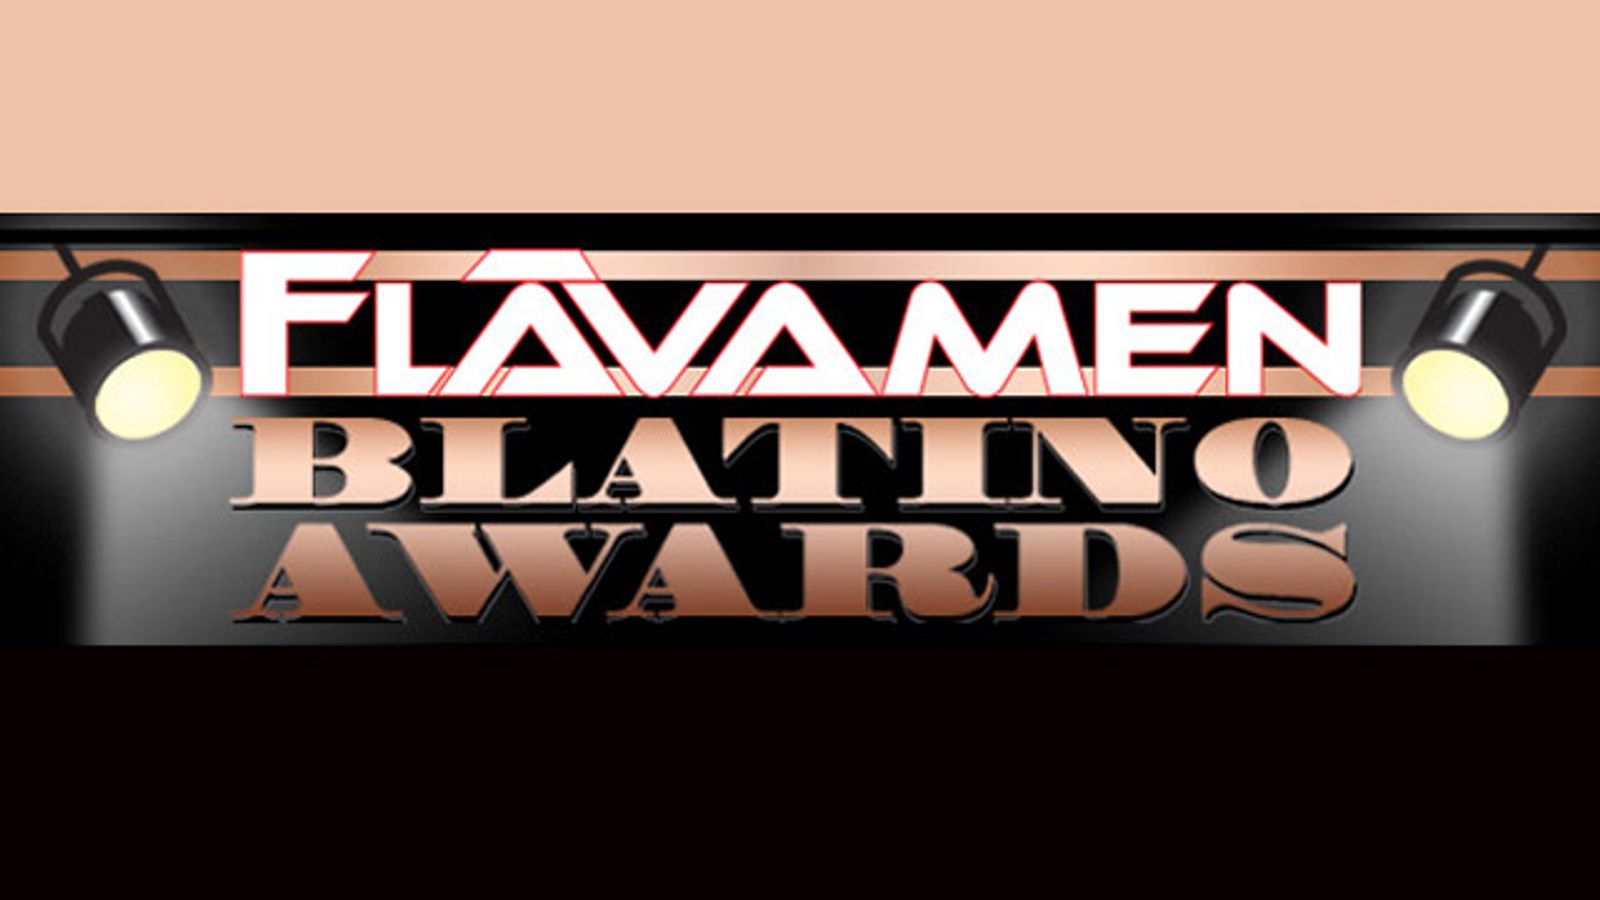 Nominations Now Open for 2014 FlavaMen Blatino Awards